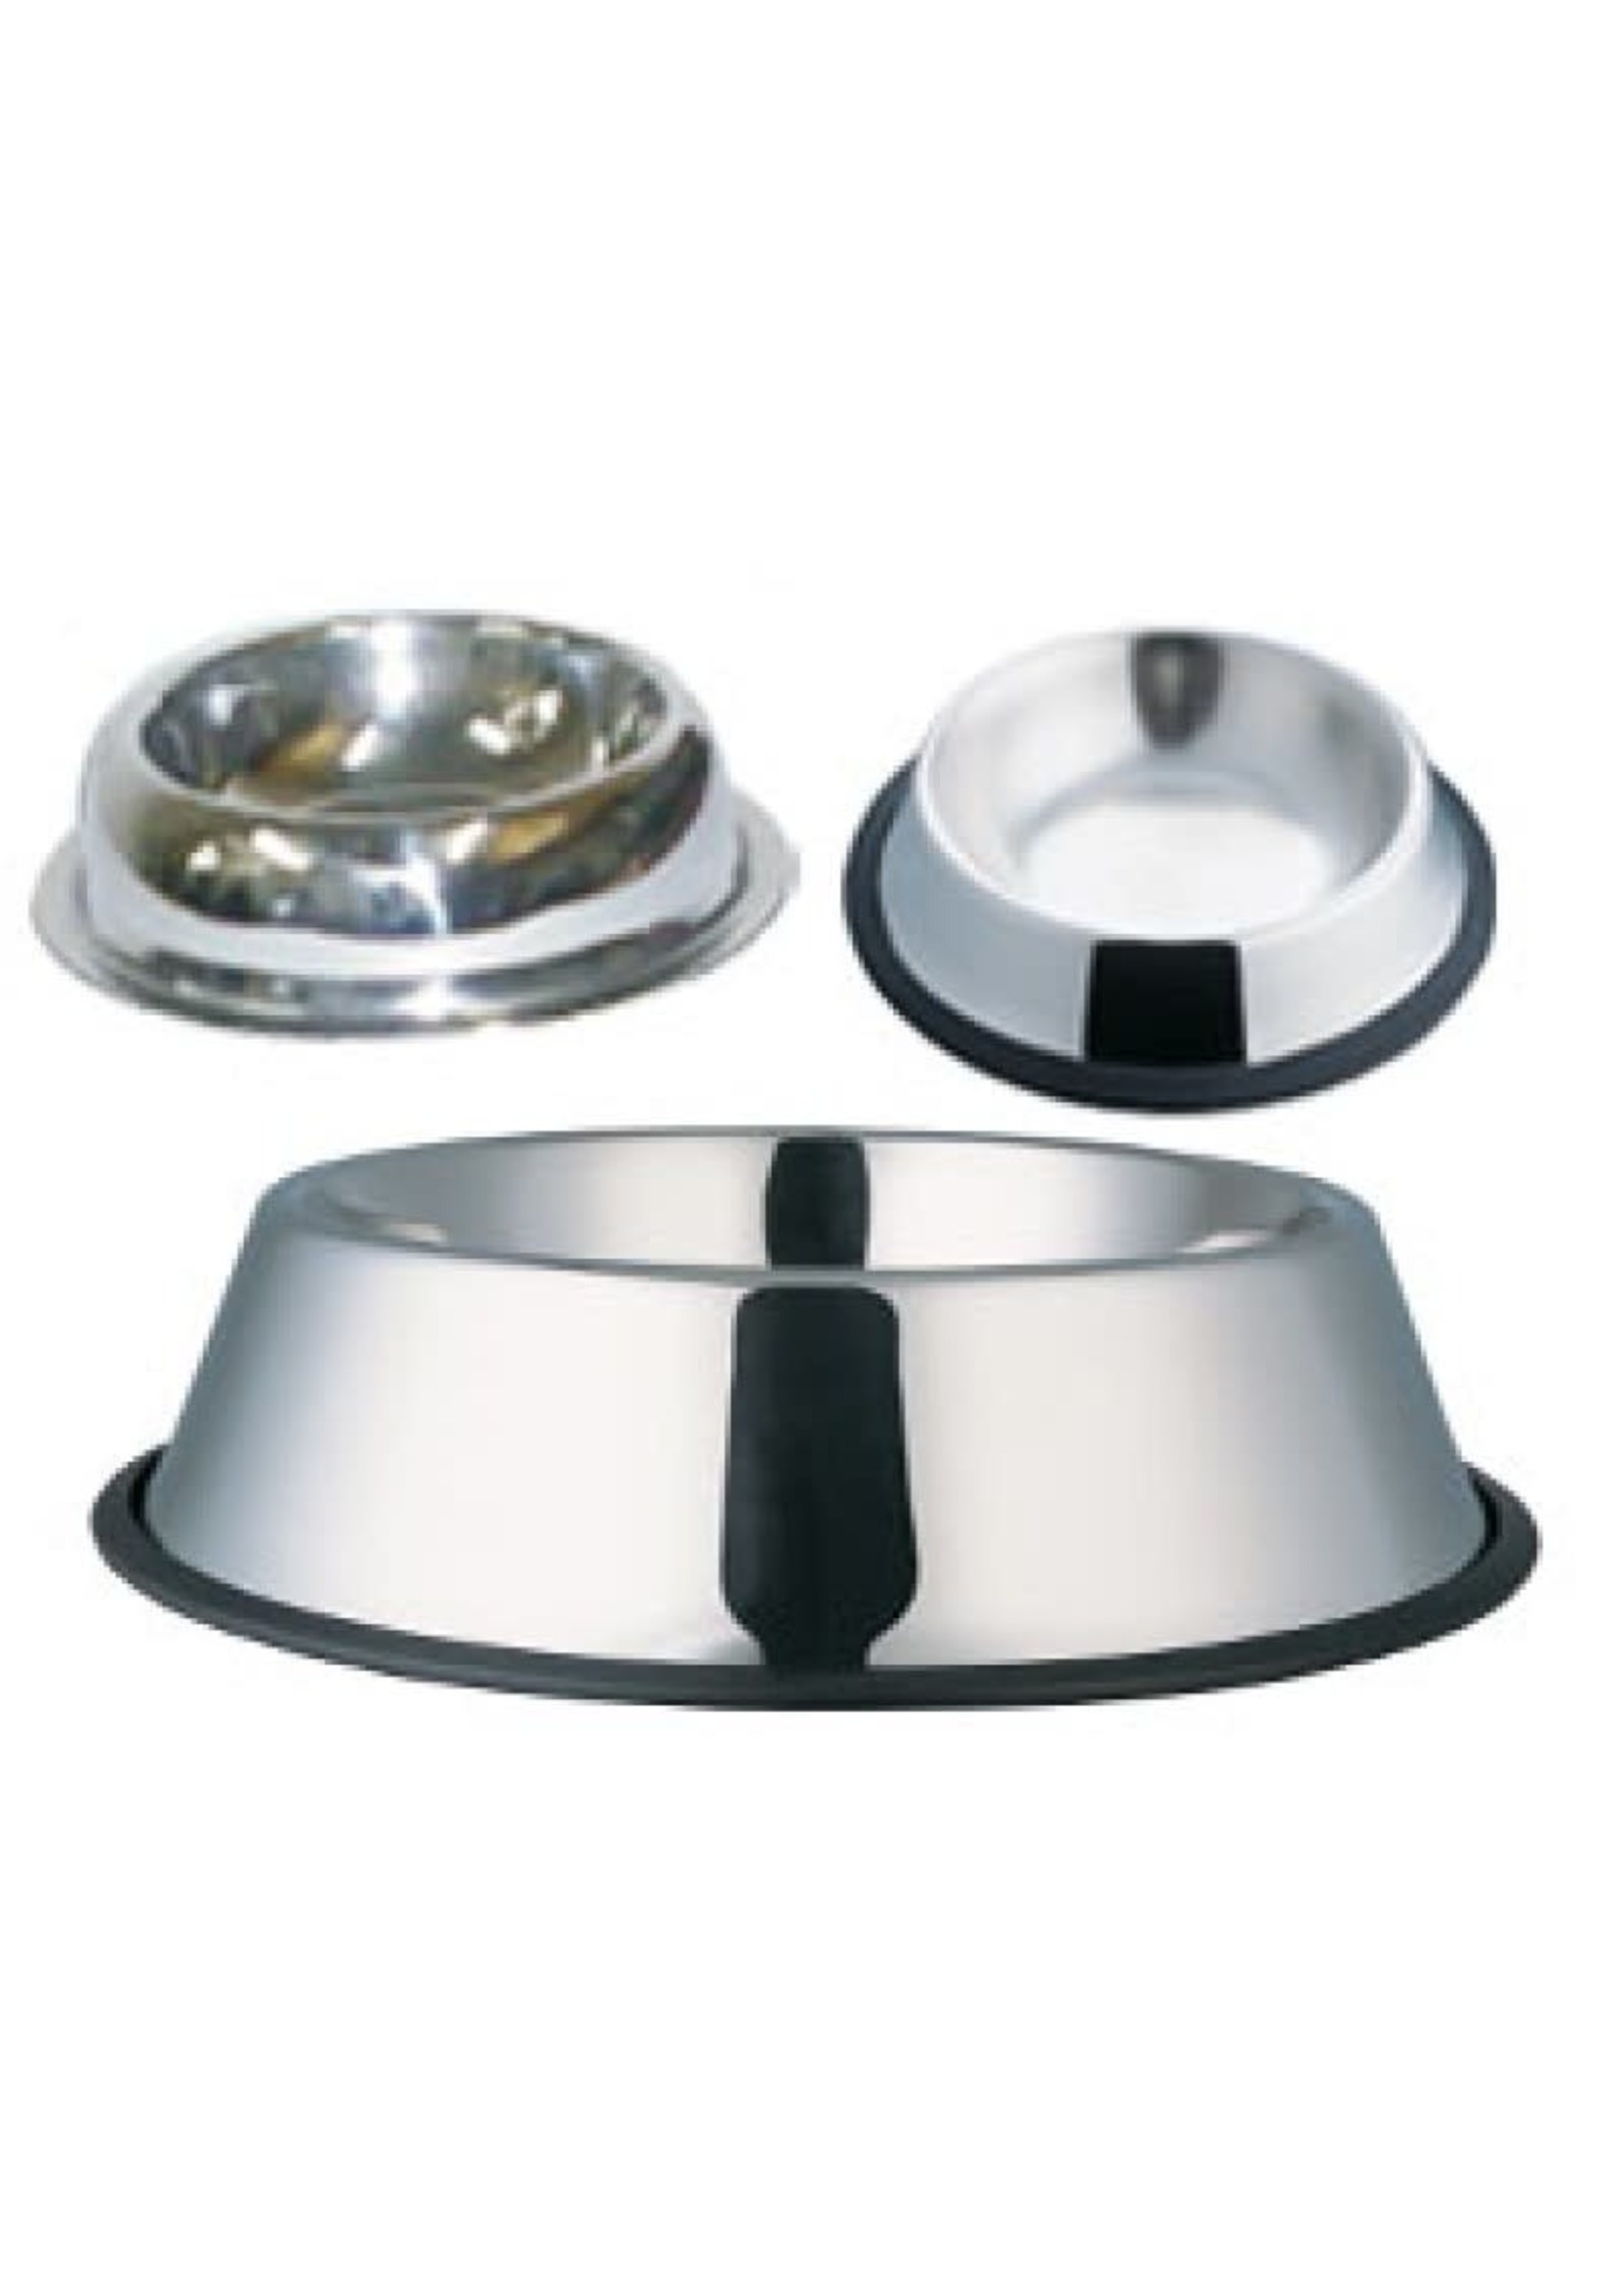 Indipet Stainless Steel Non Tip Bowl 24 oz